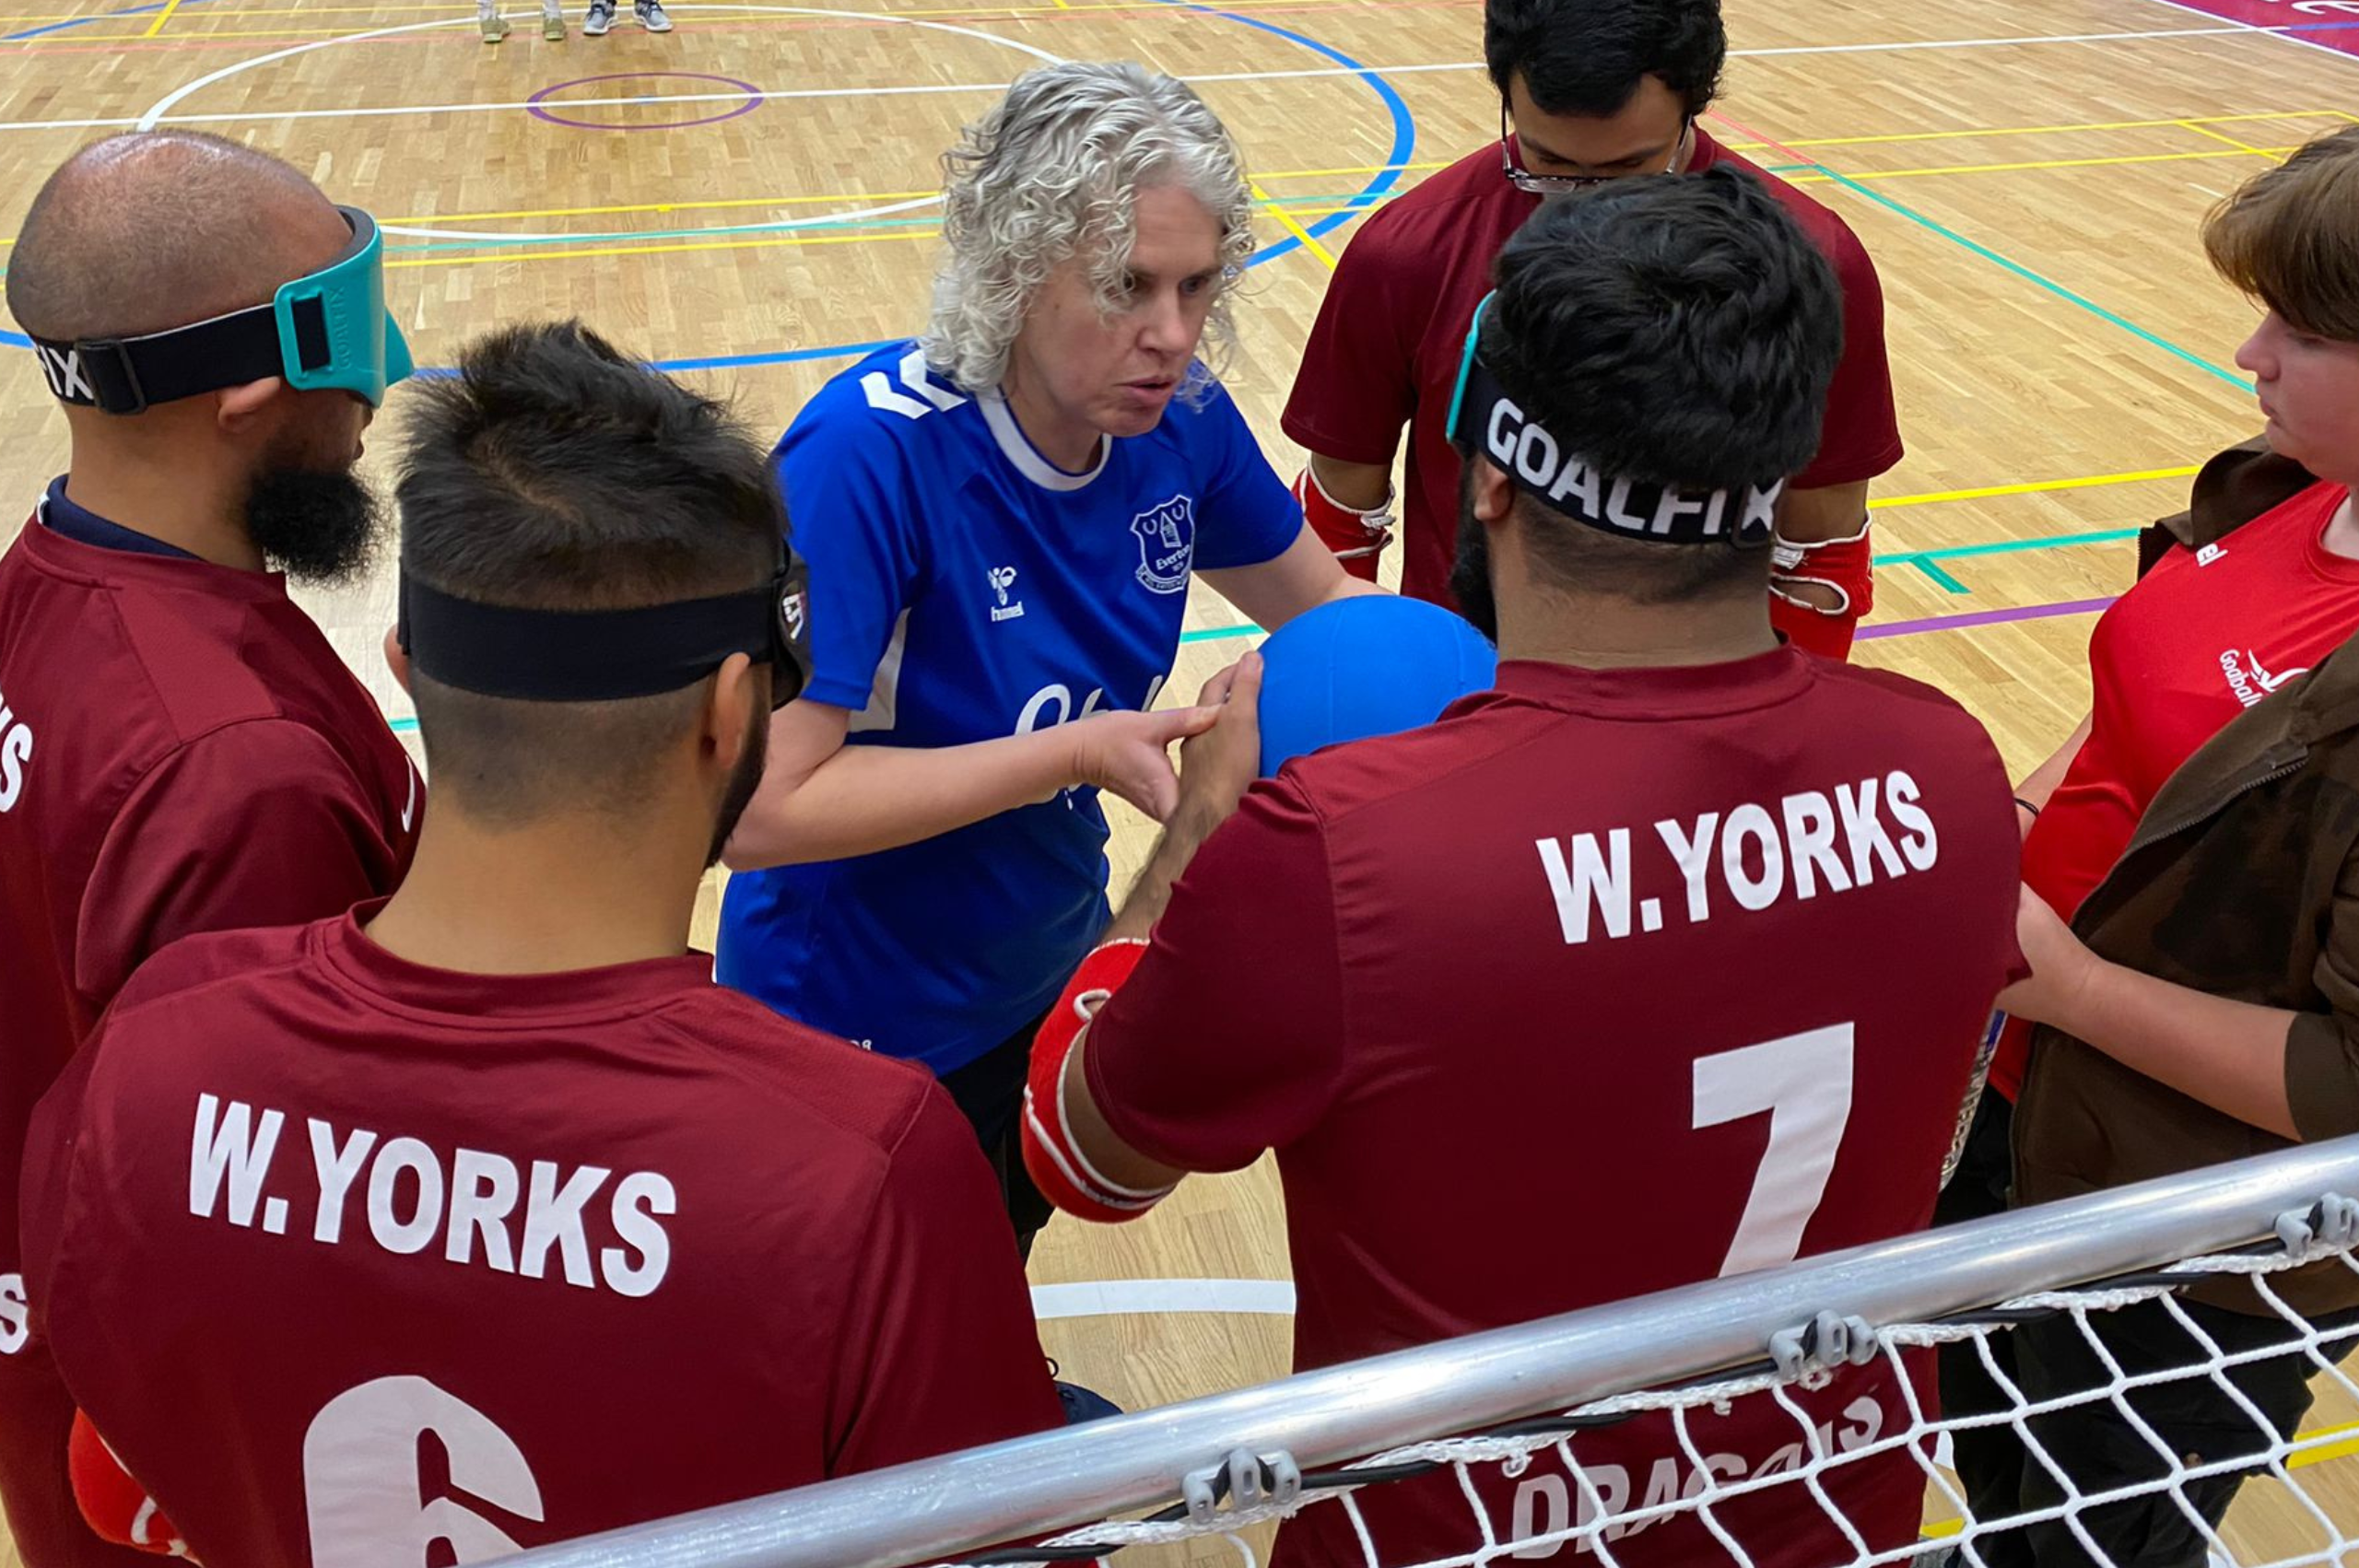 Kathryn Fielding speaks to Bradford Goalball Club team members during a team huddle. Kathryn is passing the Goalball to a player who is wearing eye shades